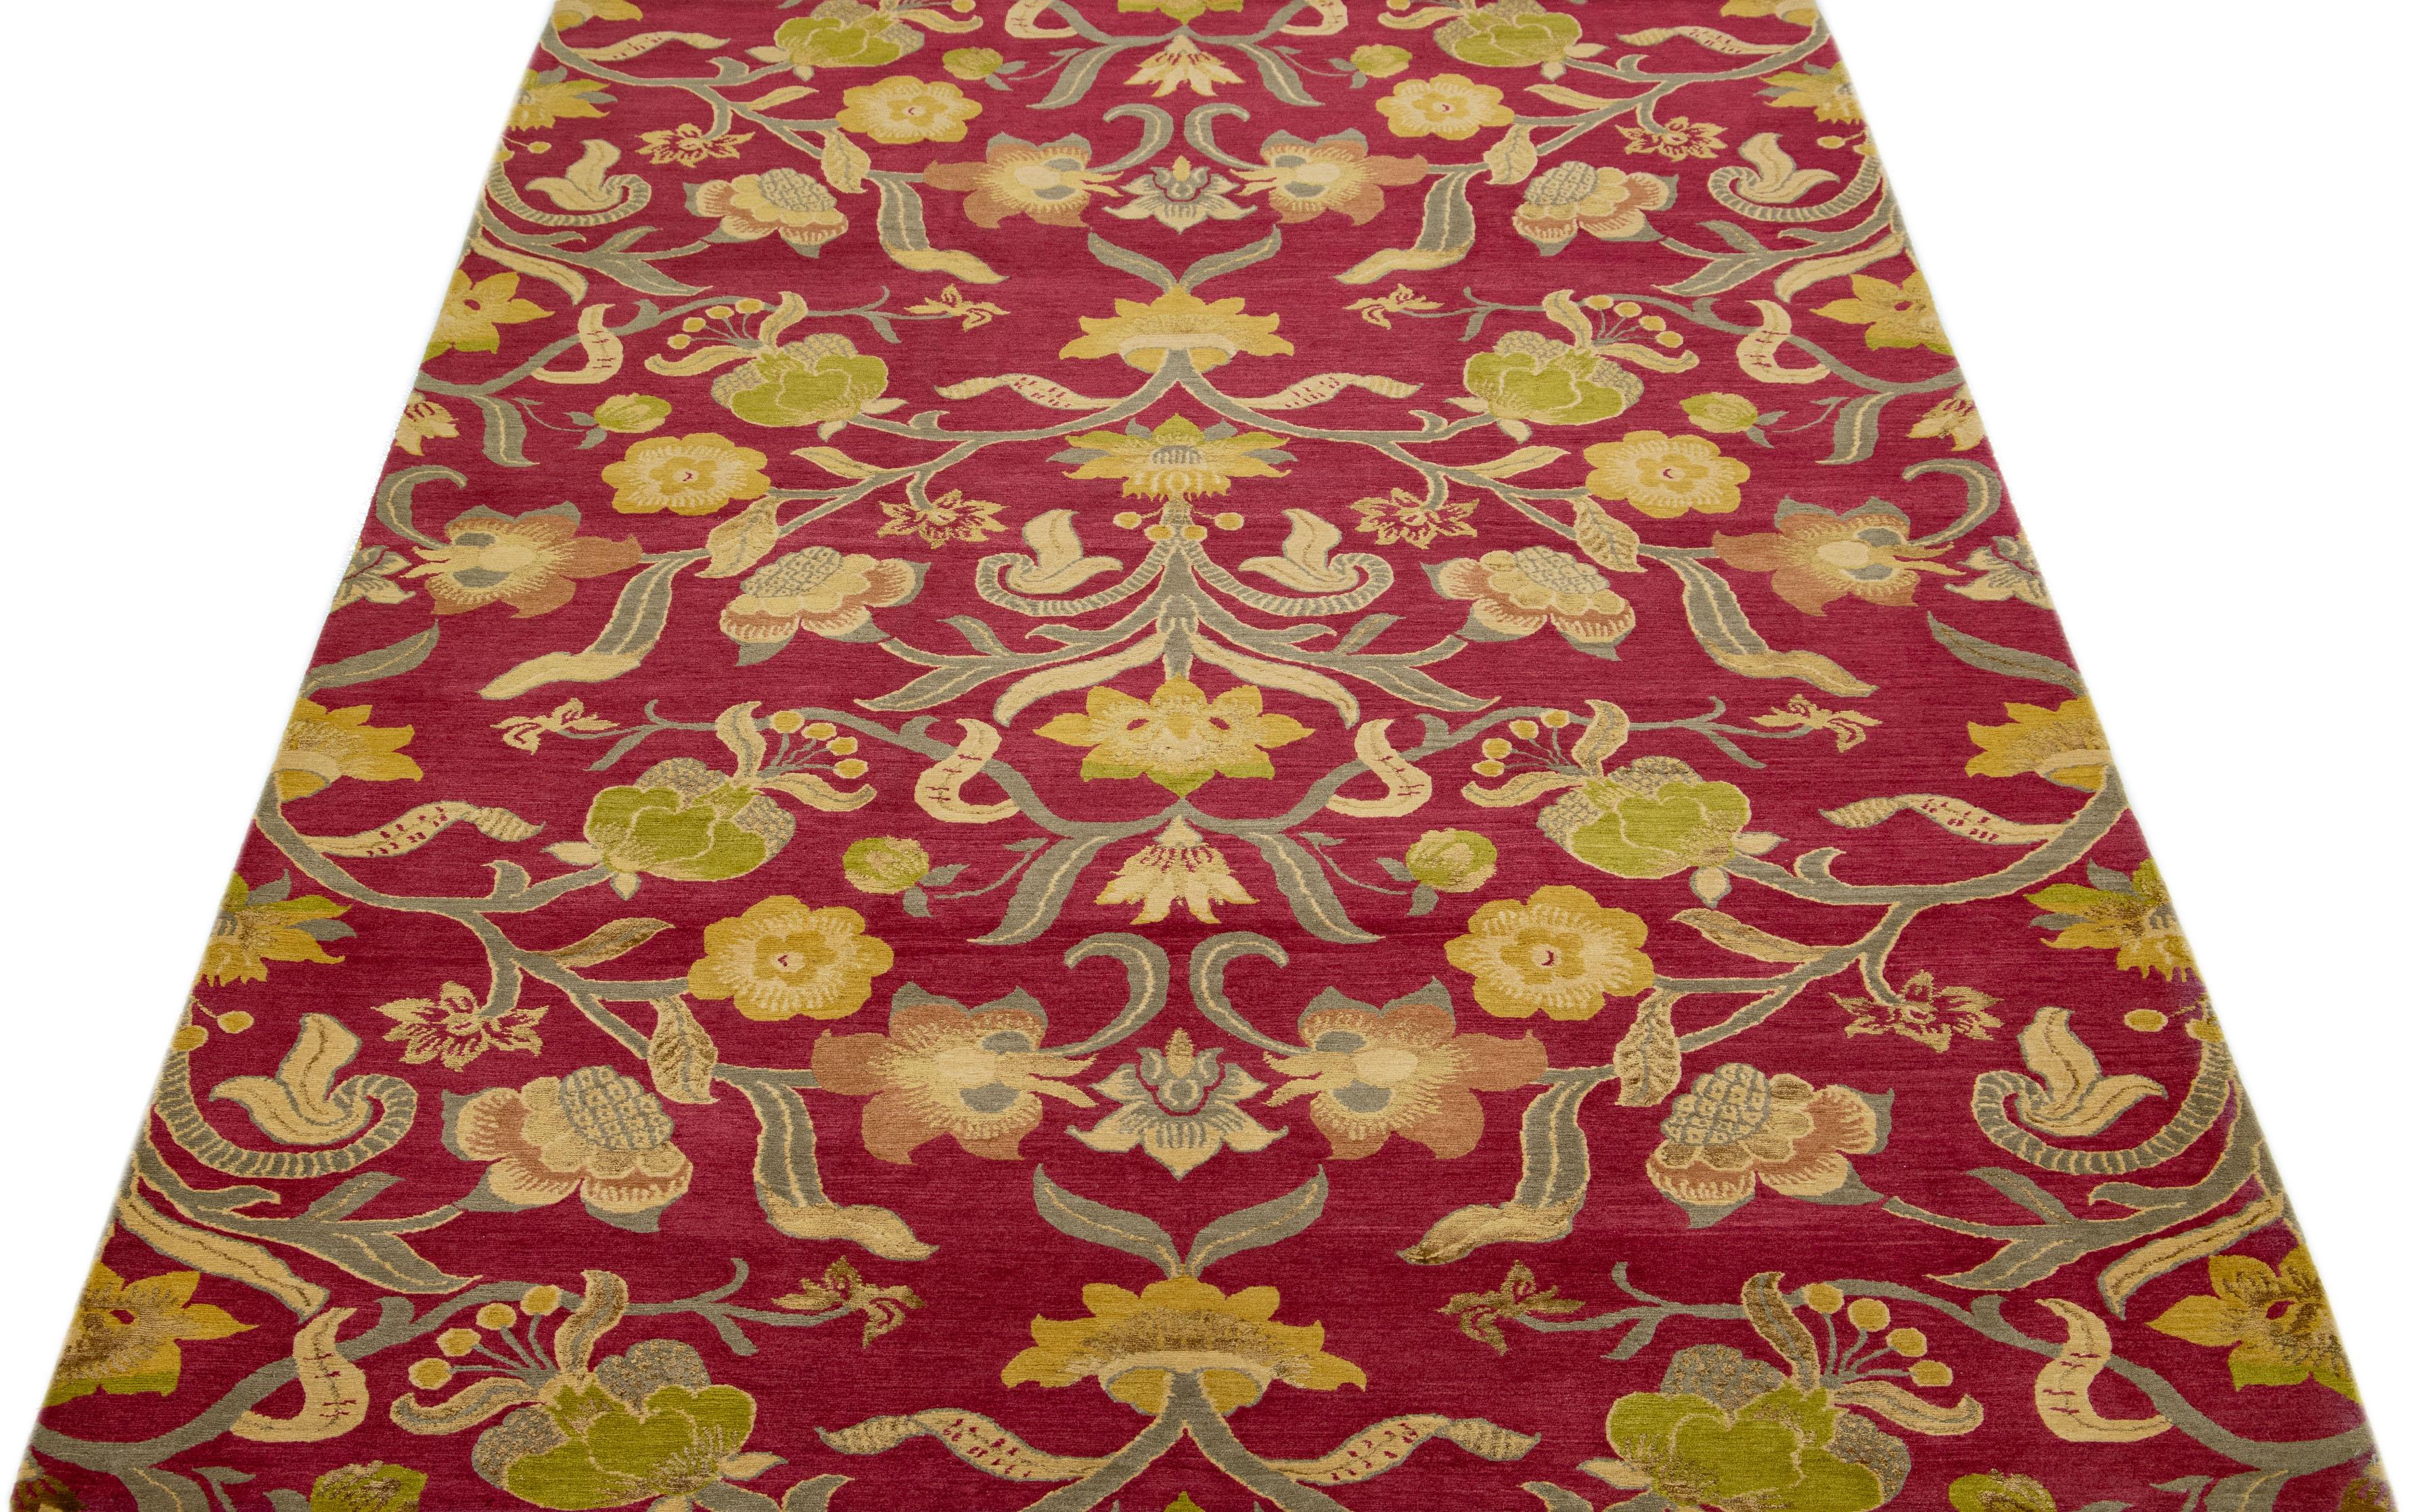 Crafted from premium quality wool and silk, this contemporary Nepalese rug features an intricate all-over scroll design in stunning shades of rich red, beautifully accentuated by luxurious golden details.

This rug measures 6'2